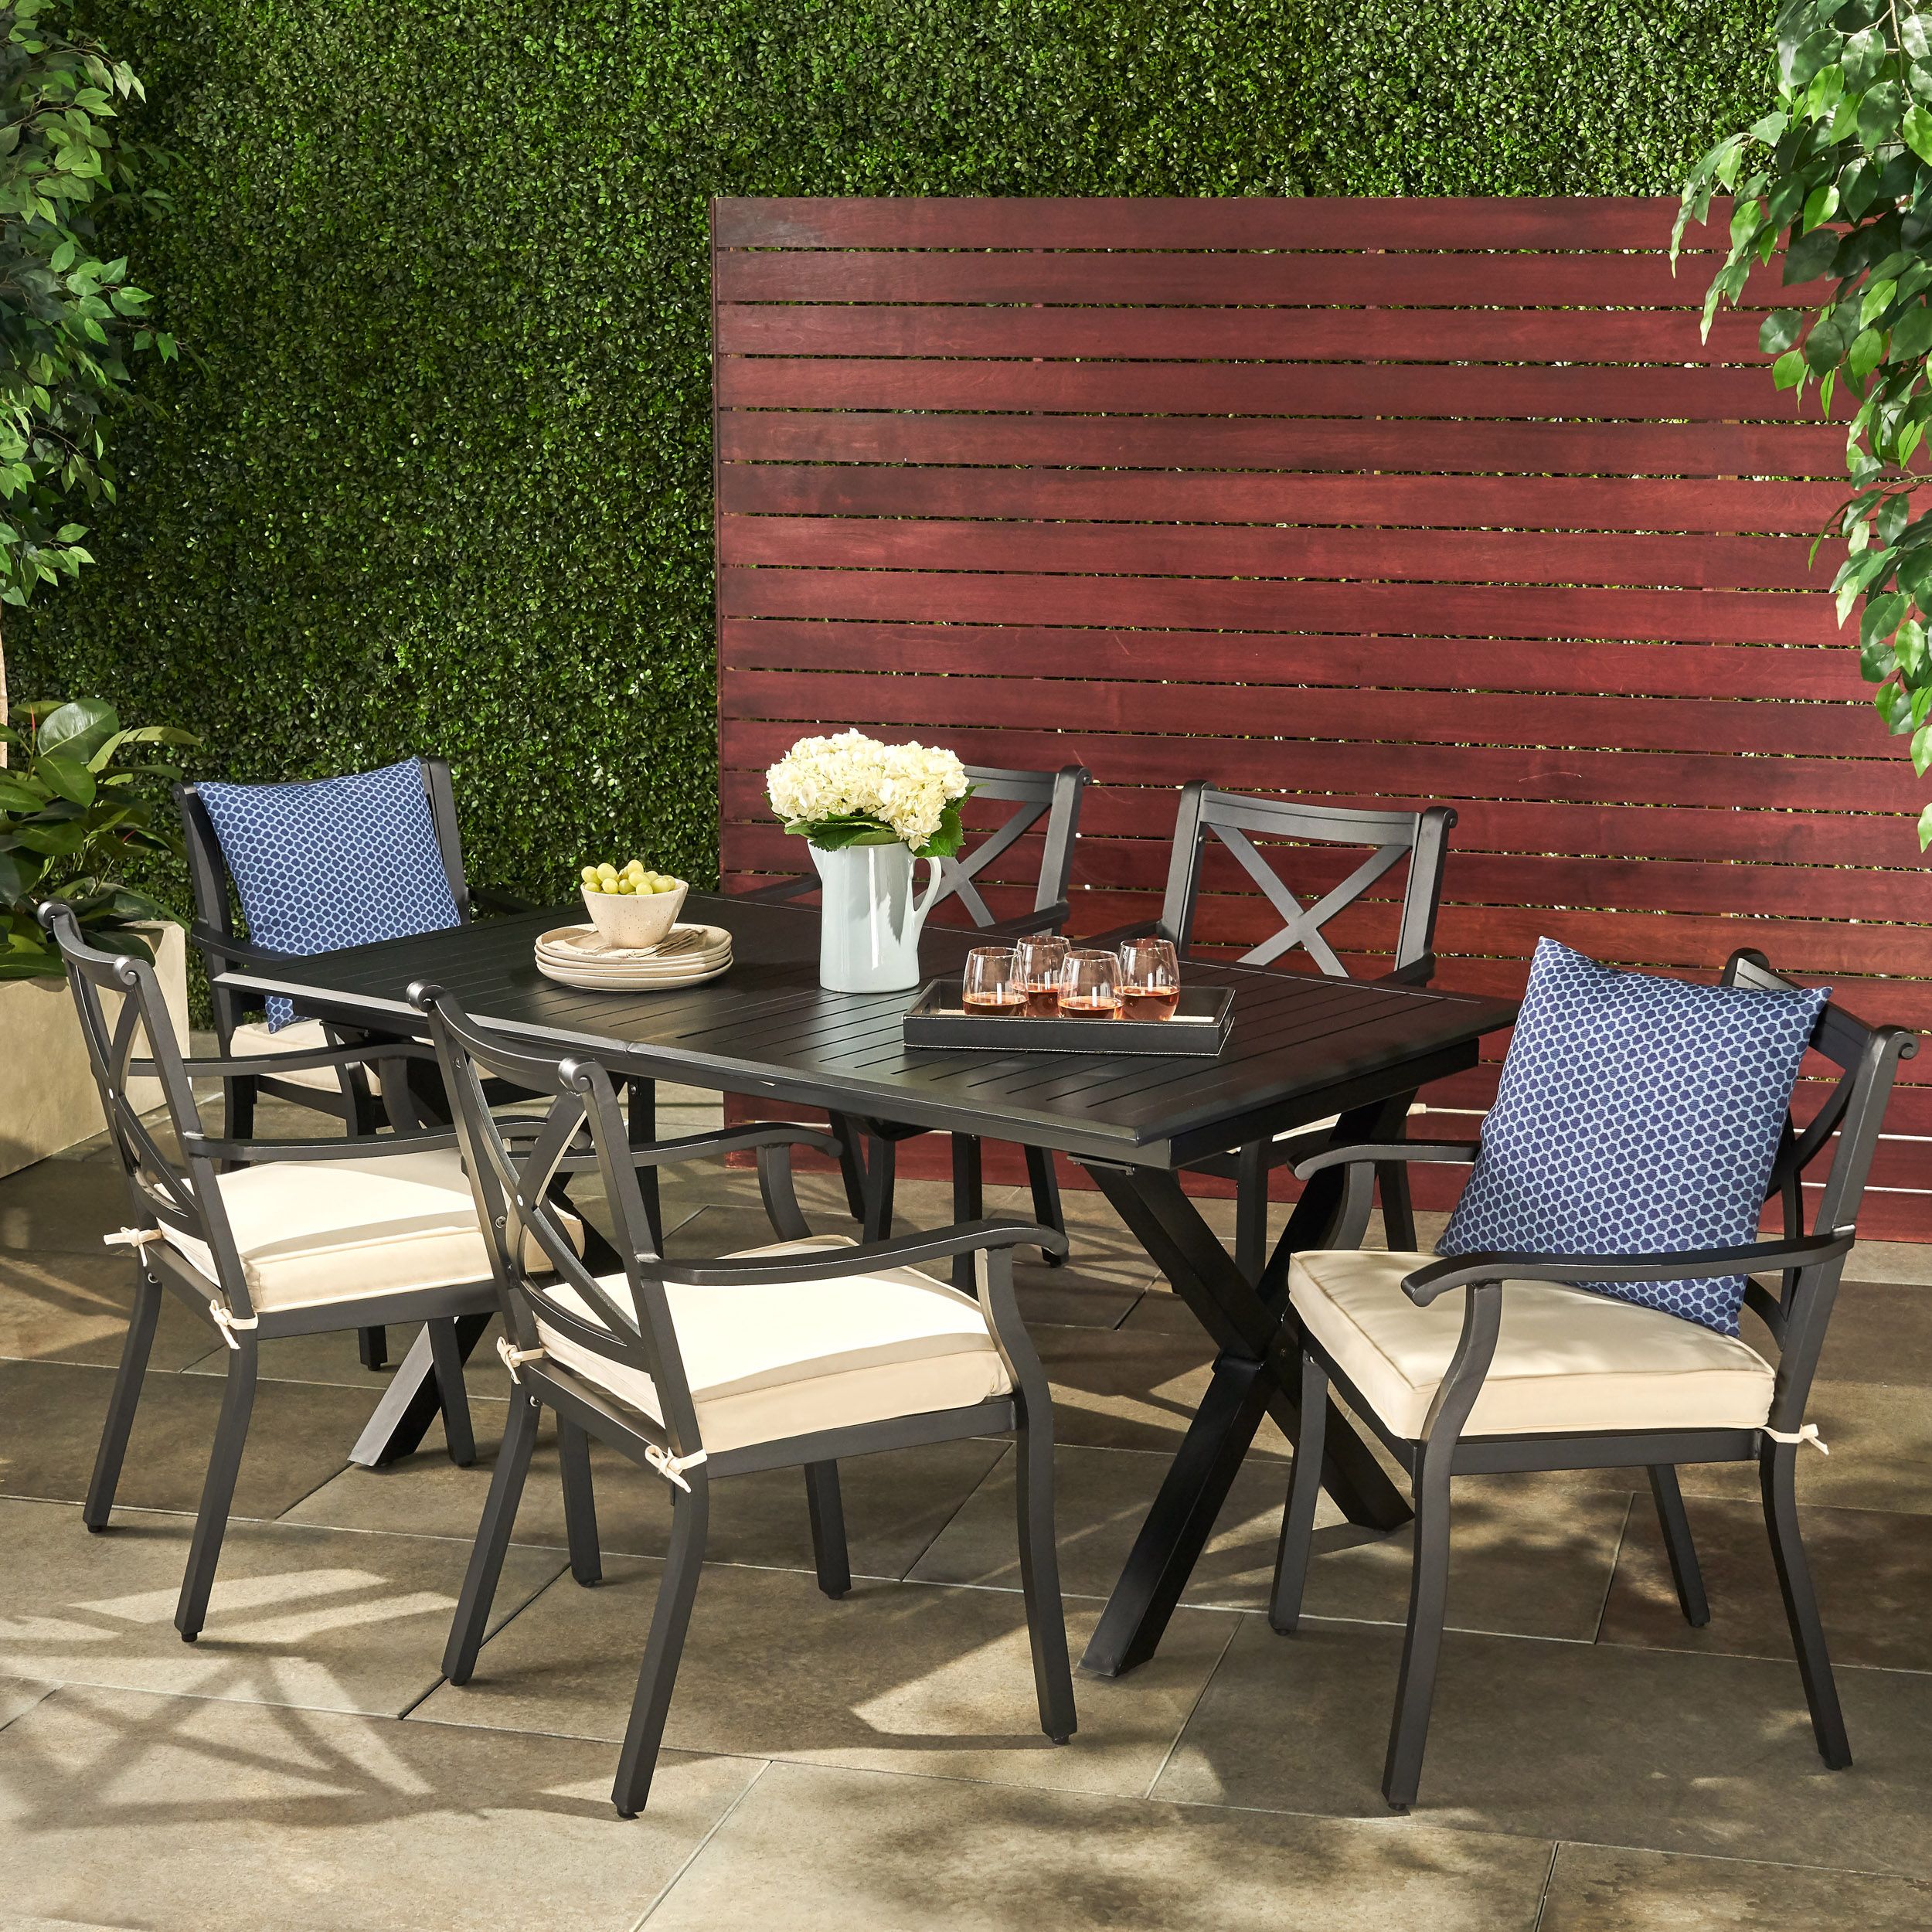 Eowyn Outdoor 7 Piece Cast Aluminum Dining Set With Ivory Water Intended For Patio Dining Sets With Cushions (View 4 of 15)